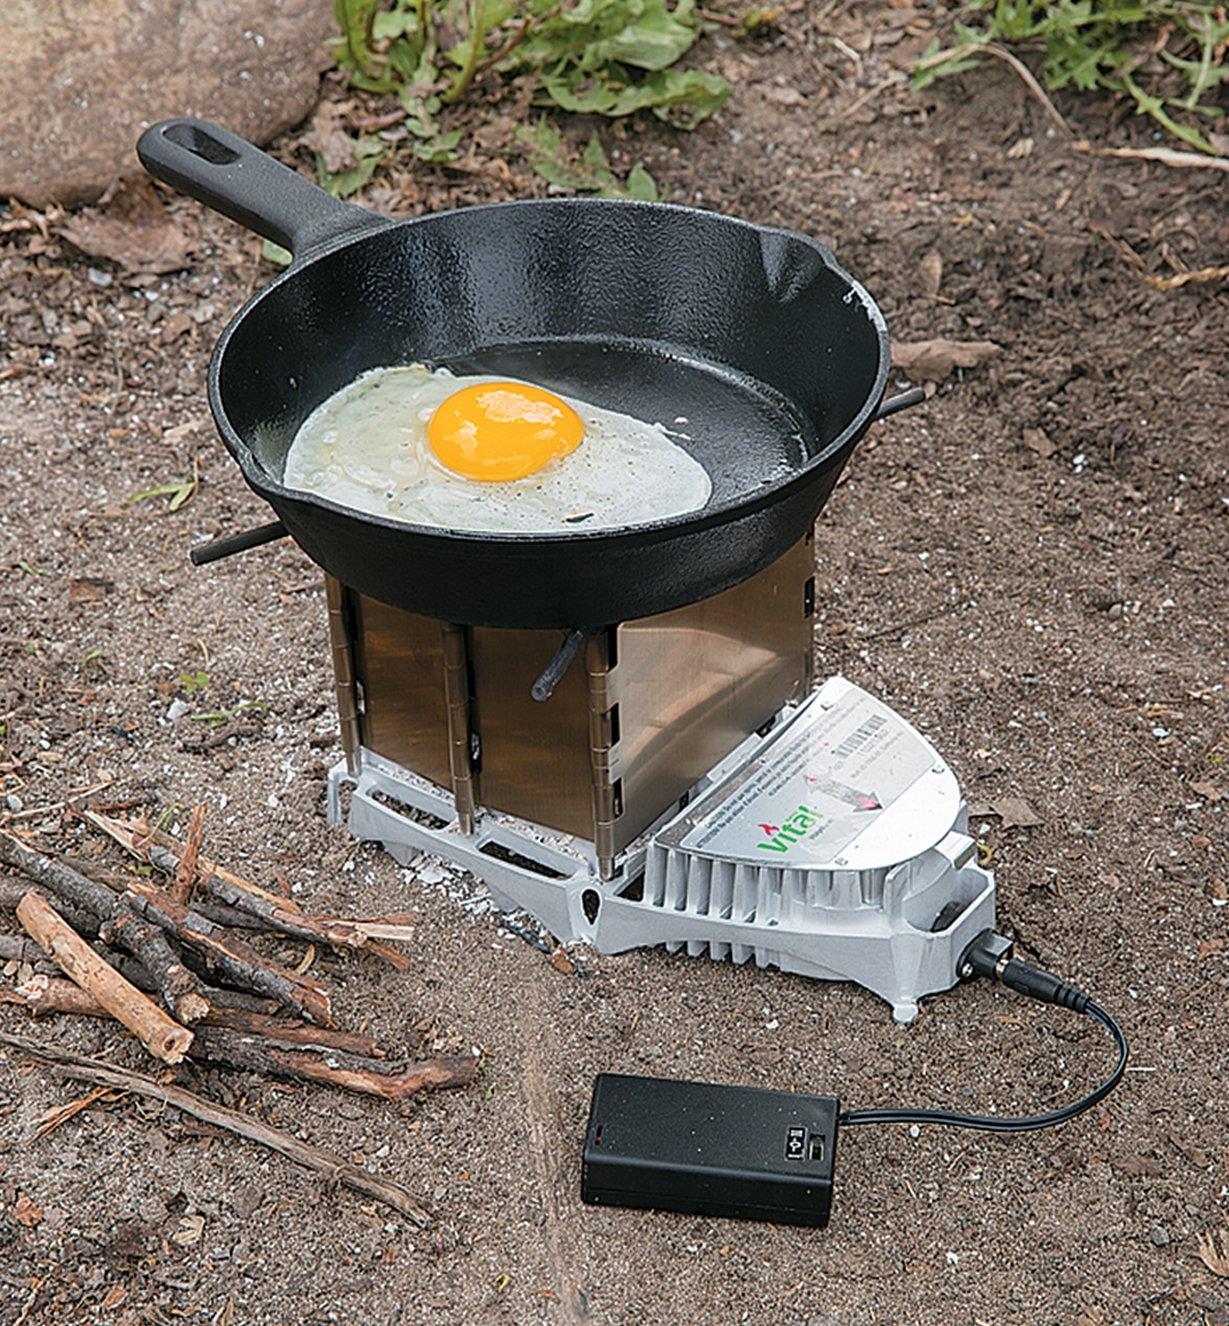 Cooking an egg in a frying pan on a VitalGrill Camp Stove